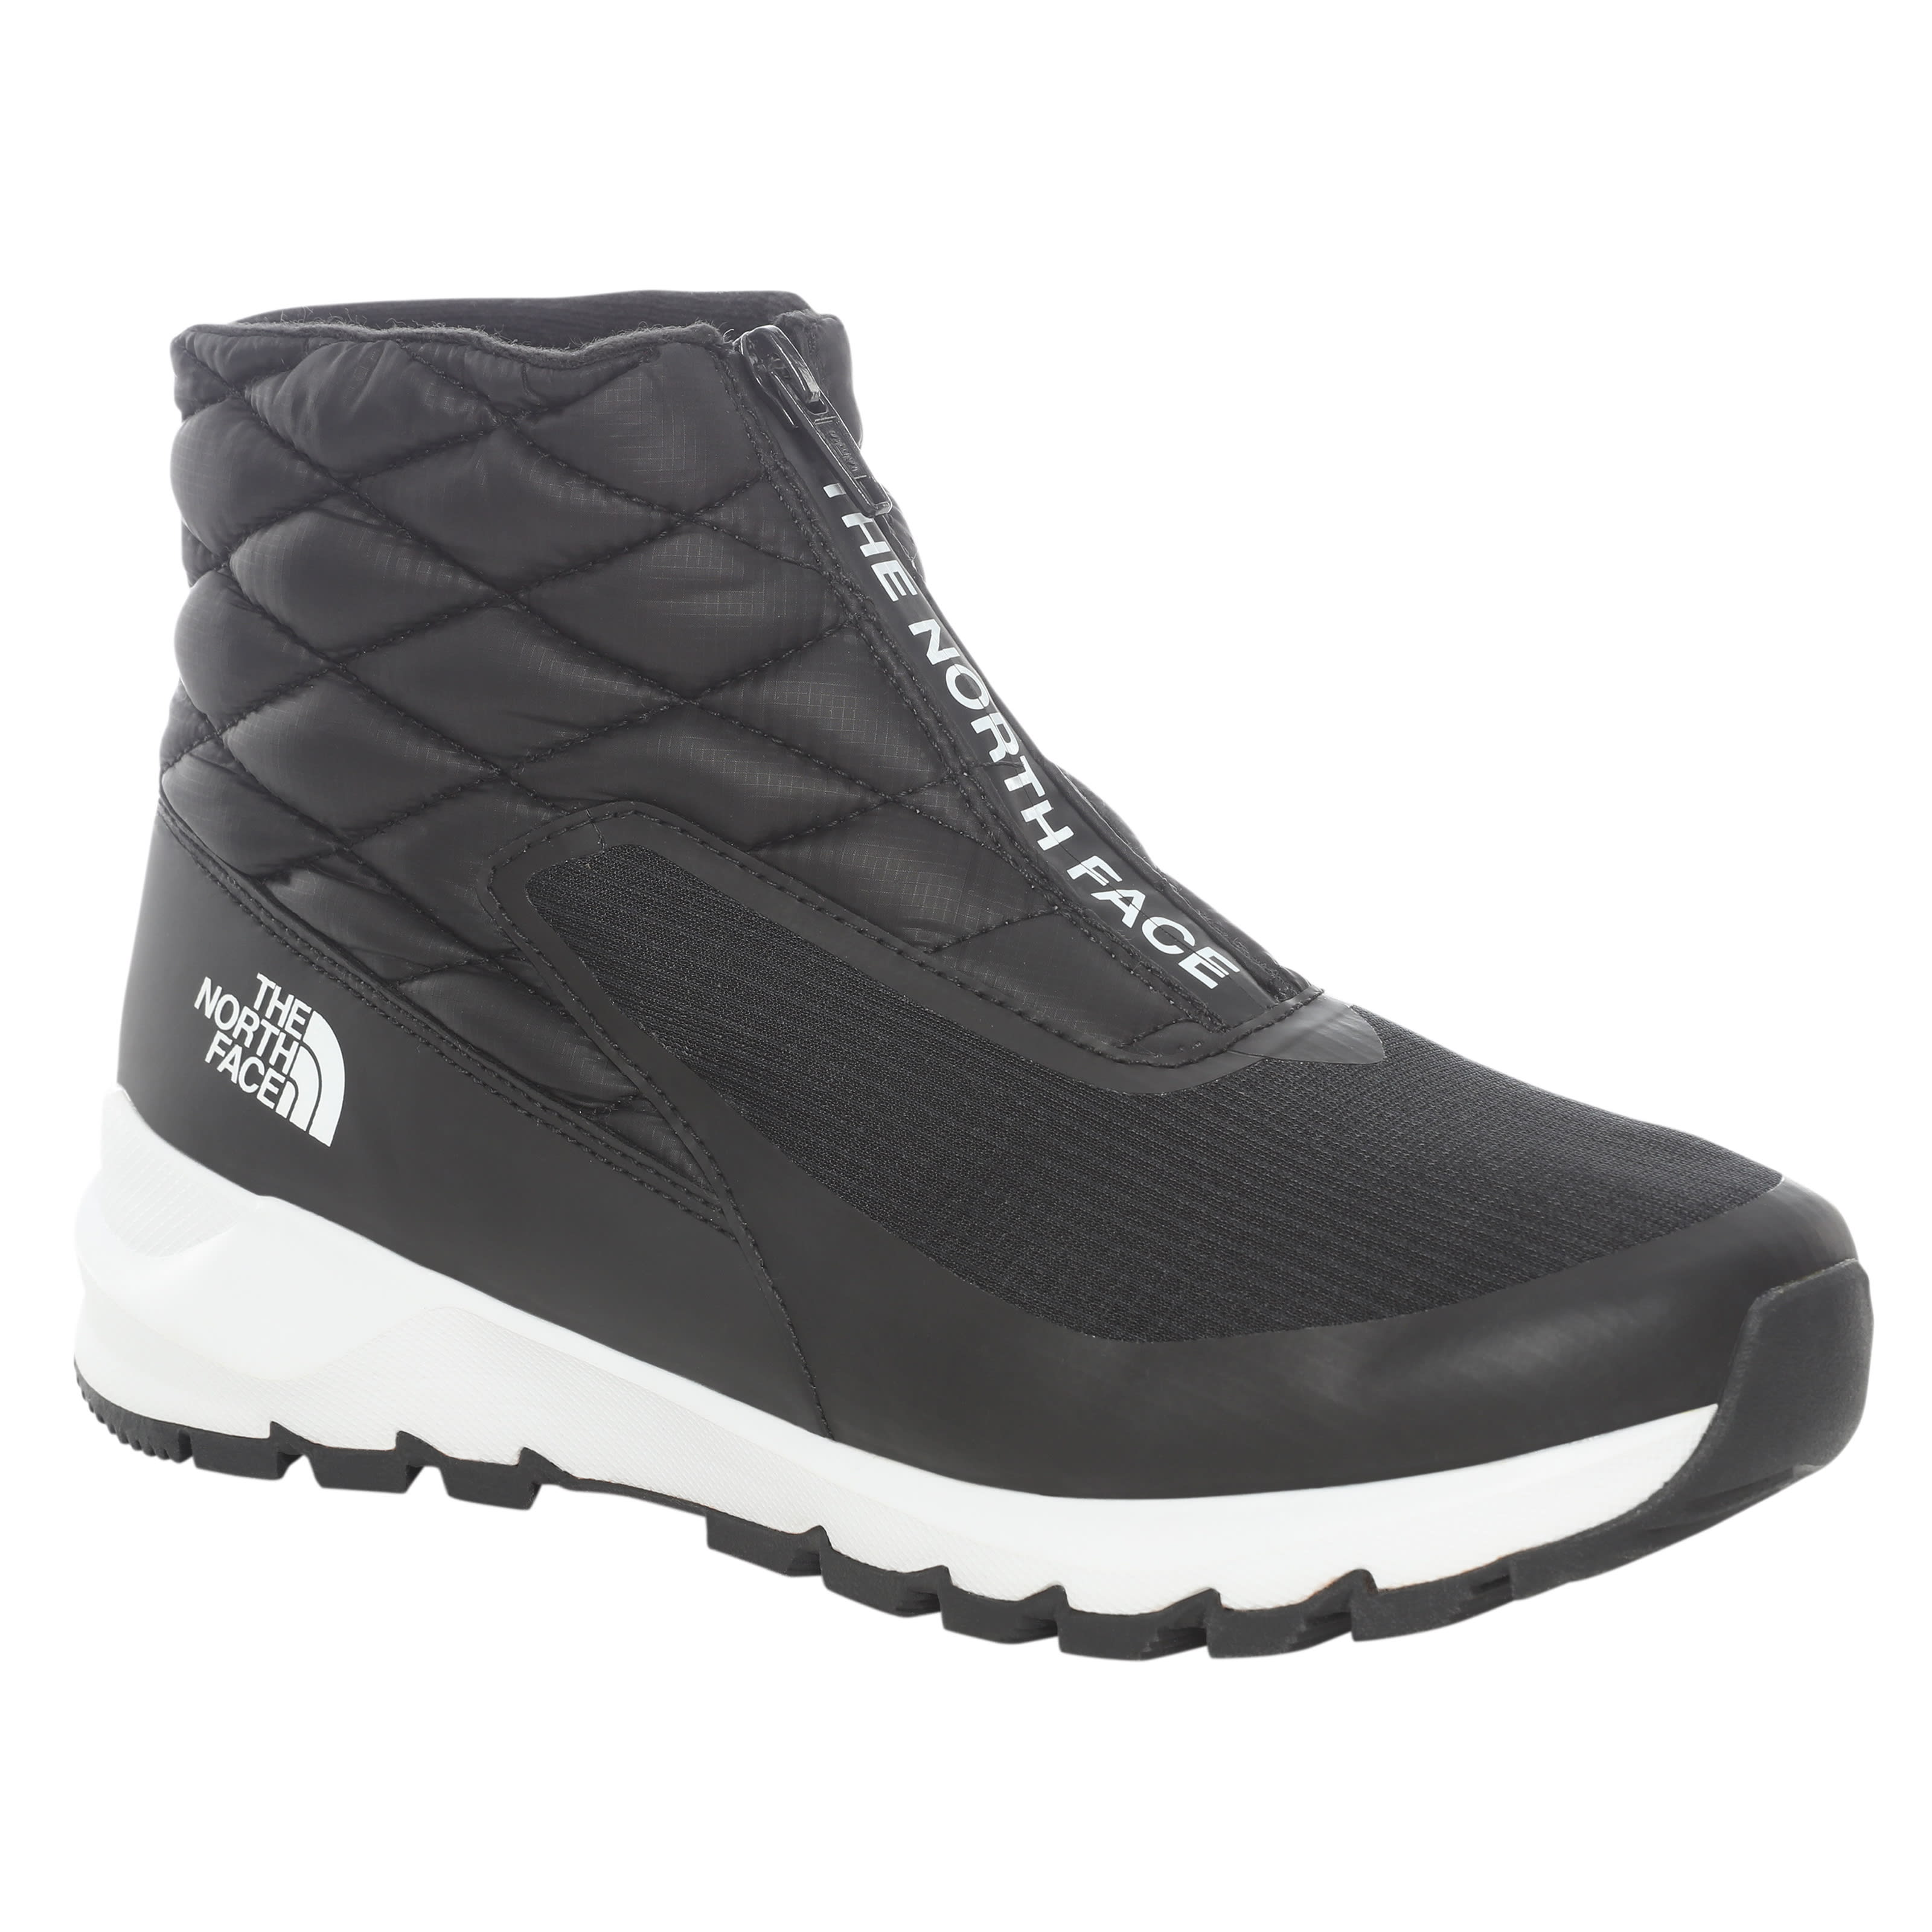 Køb The North Face Thermoball Boots fra Outnorth